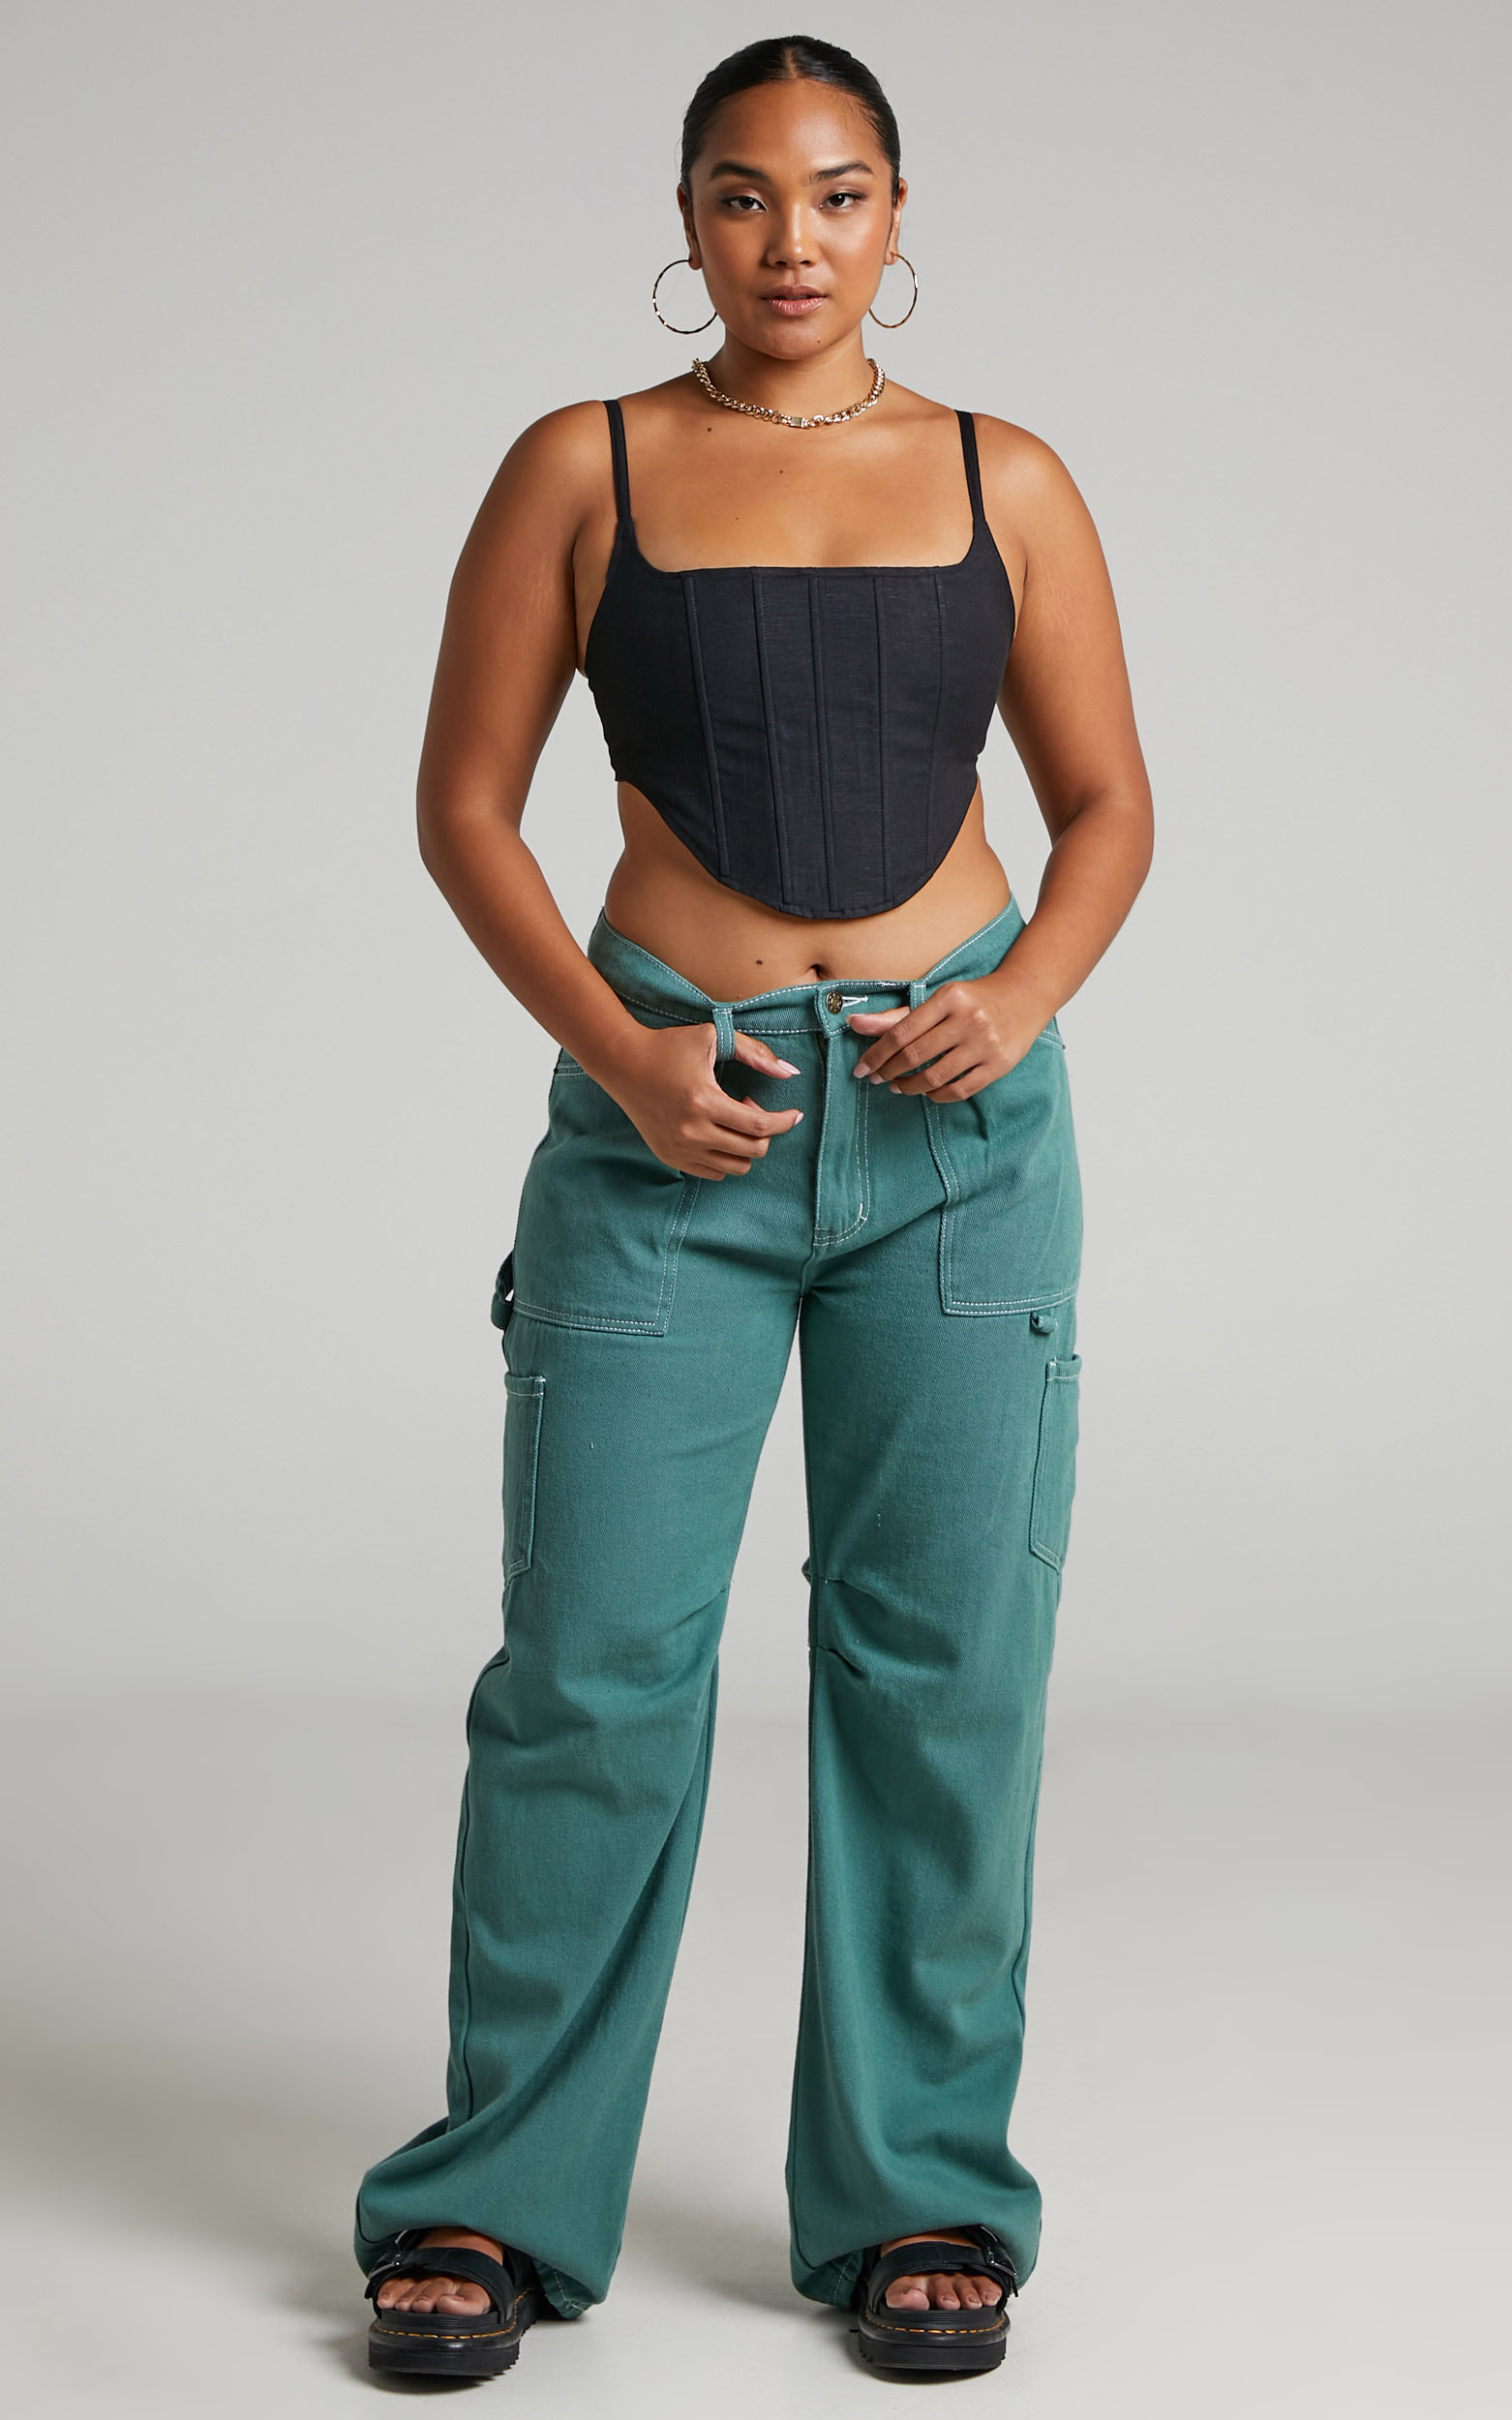 LIONESS - Miami Vice Pant in Forest Green - L, GRN2, hi-res image number null